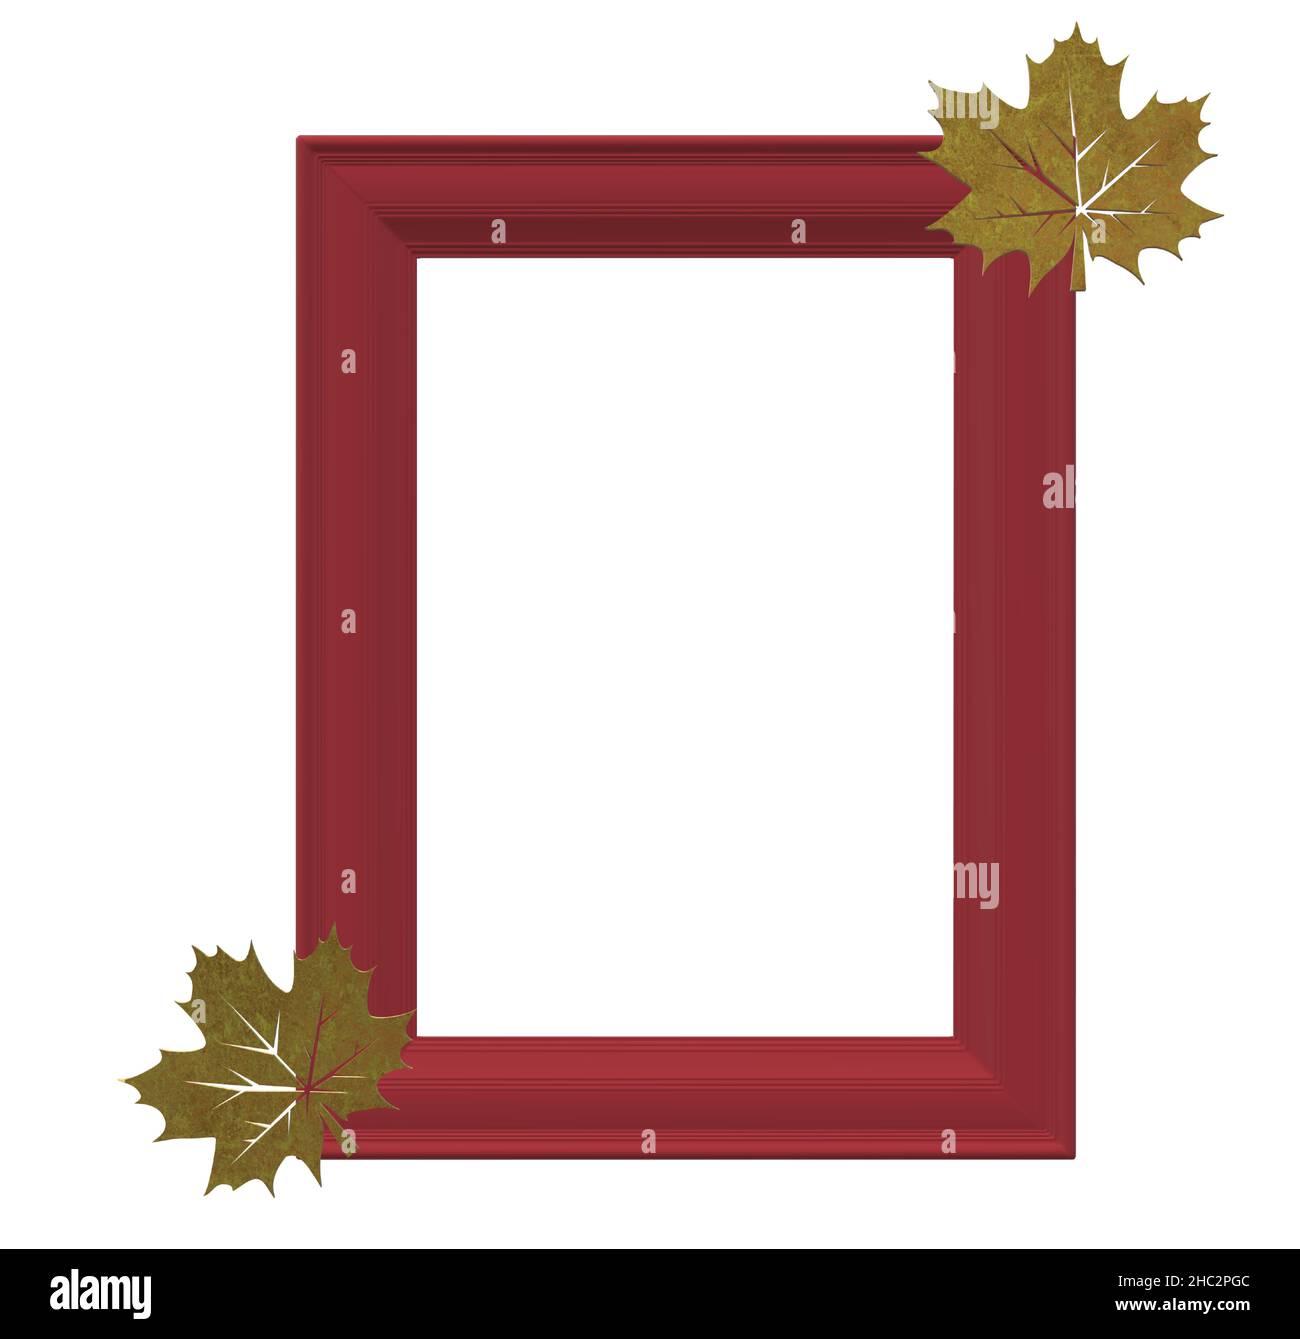 Dark Red Picture Photo Frame with Gold Golden Leaves Decoration Stock Vector